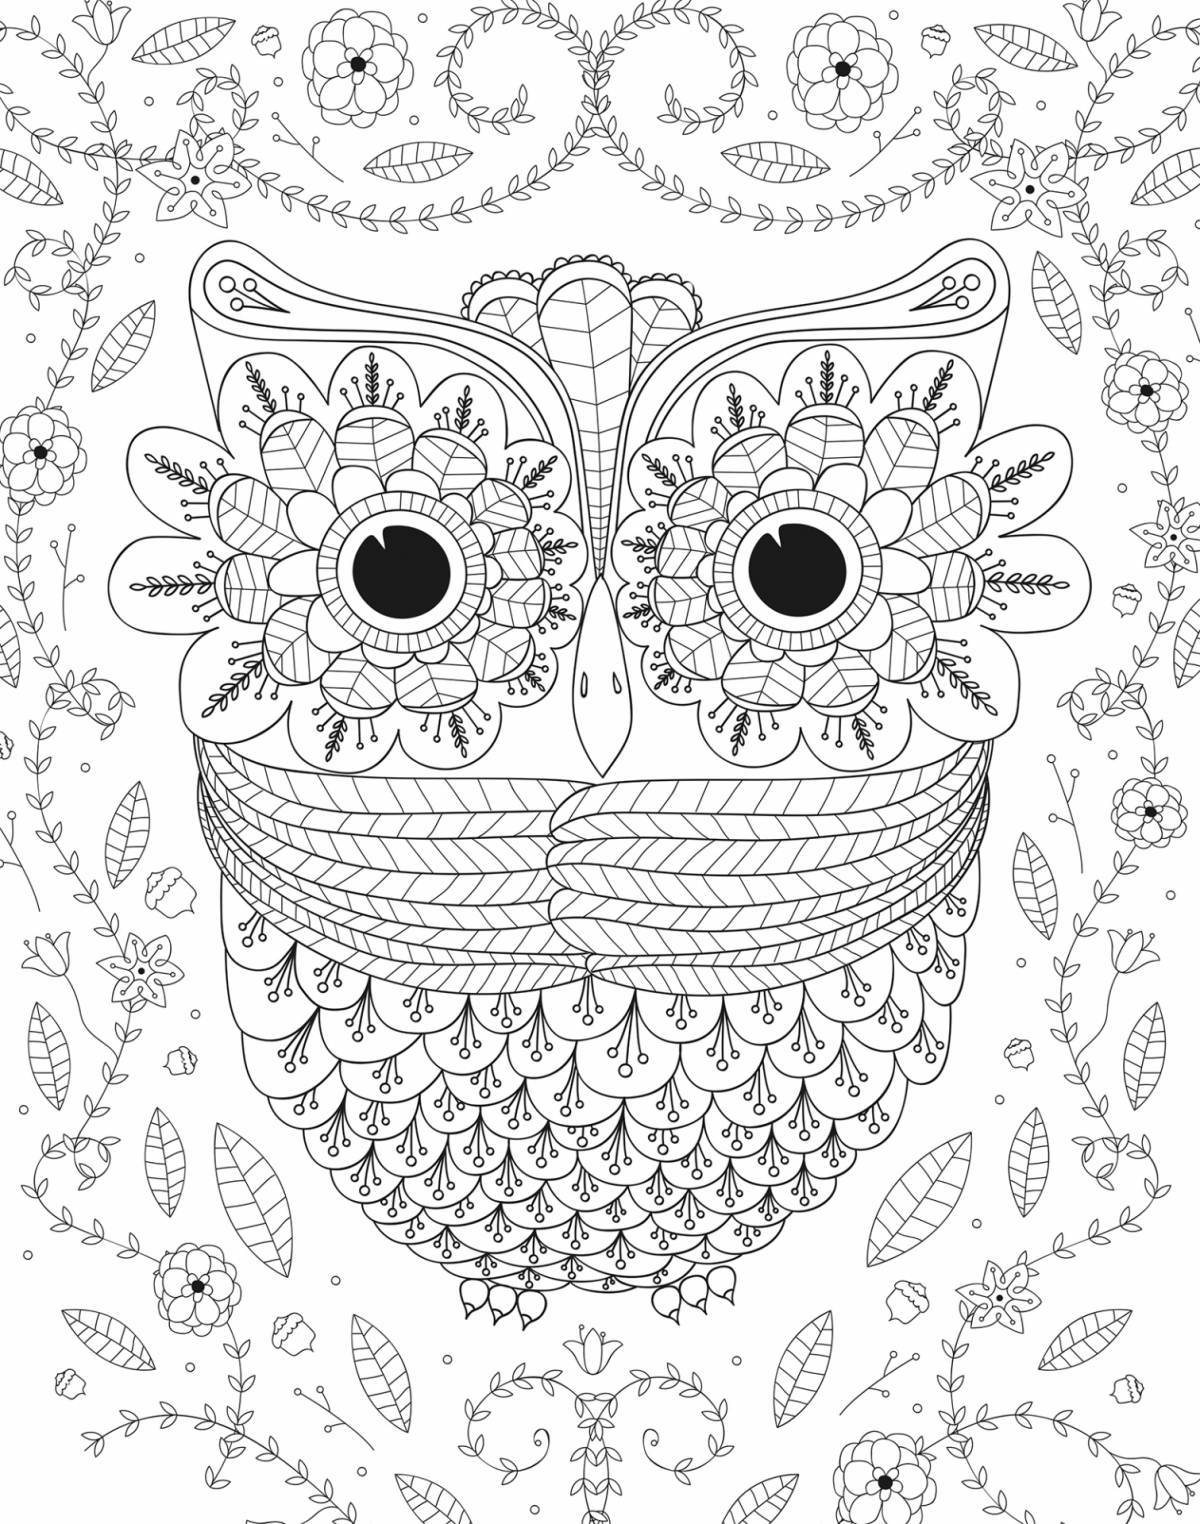 Exquisite coloring owl antistress